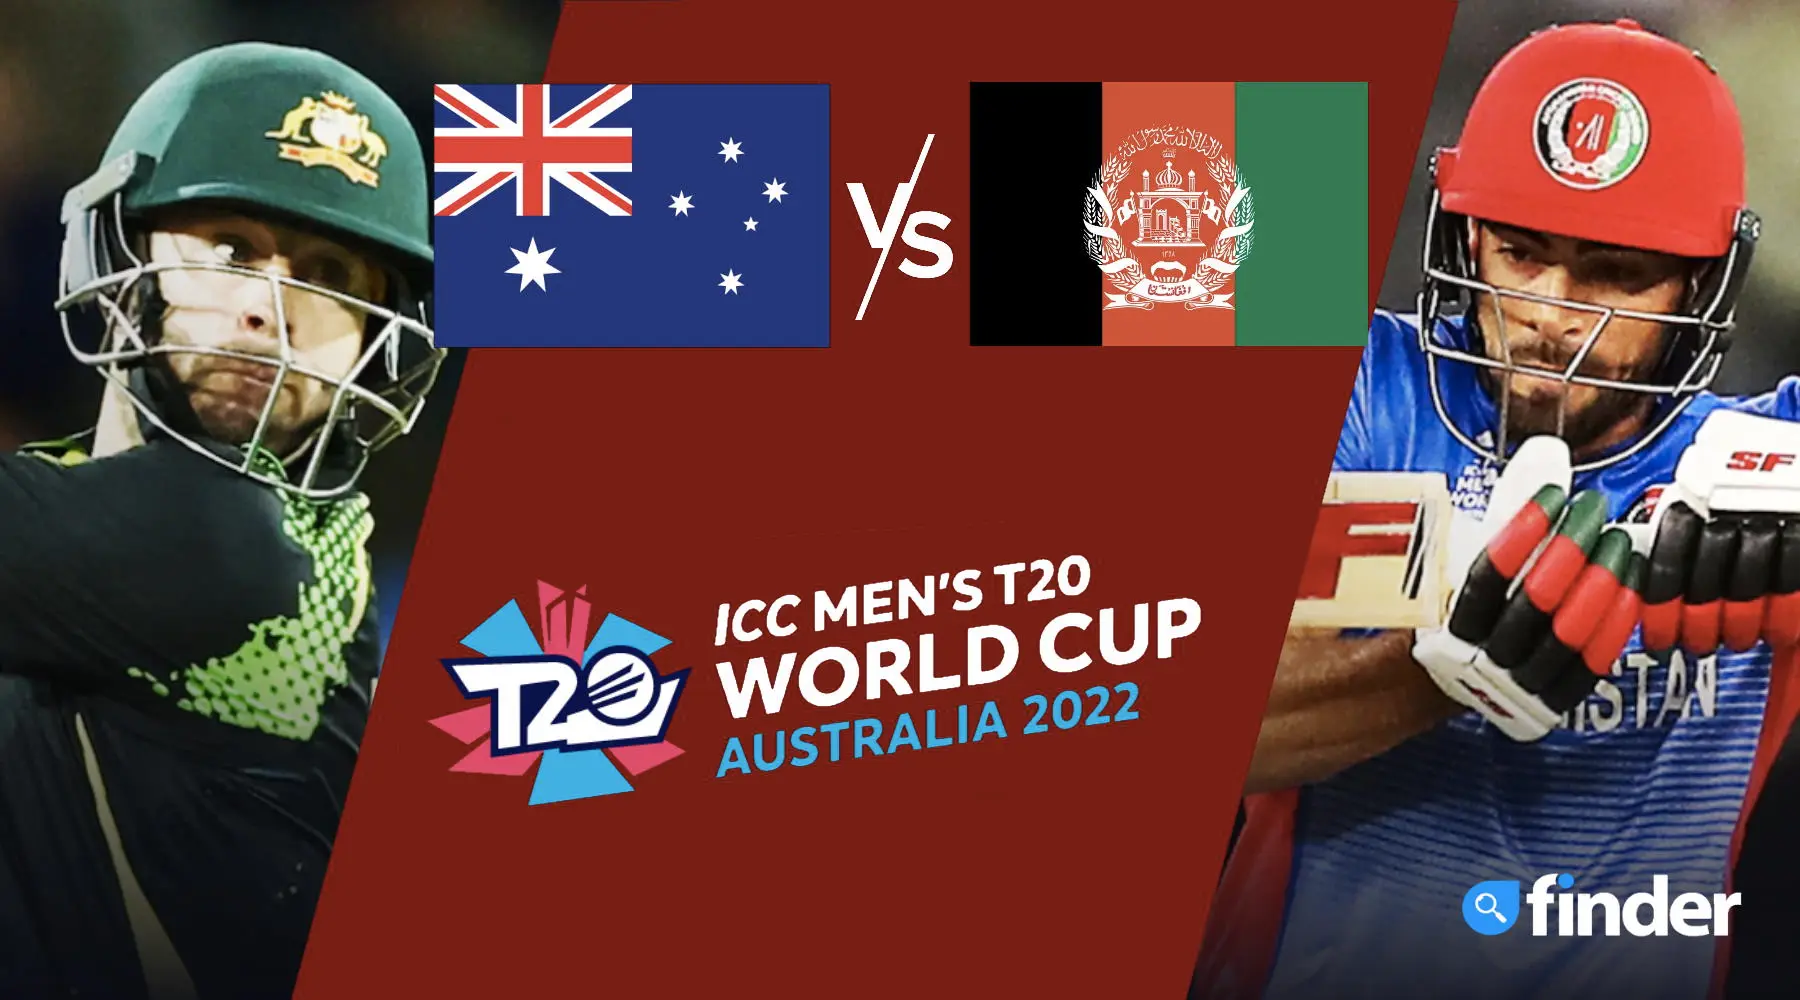 AUS vs AFG How to watch T20 World Cup cricket match live in Australia